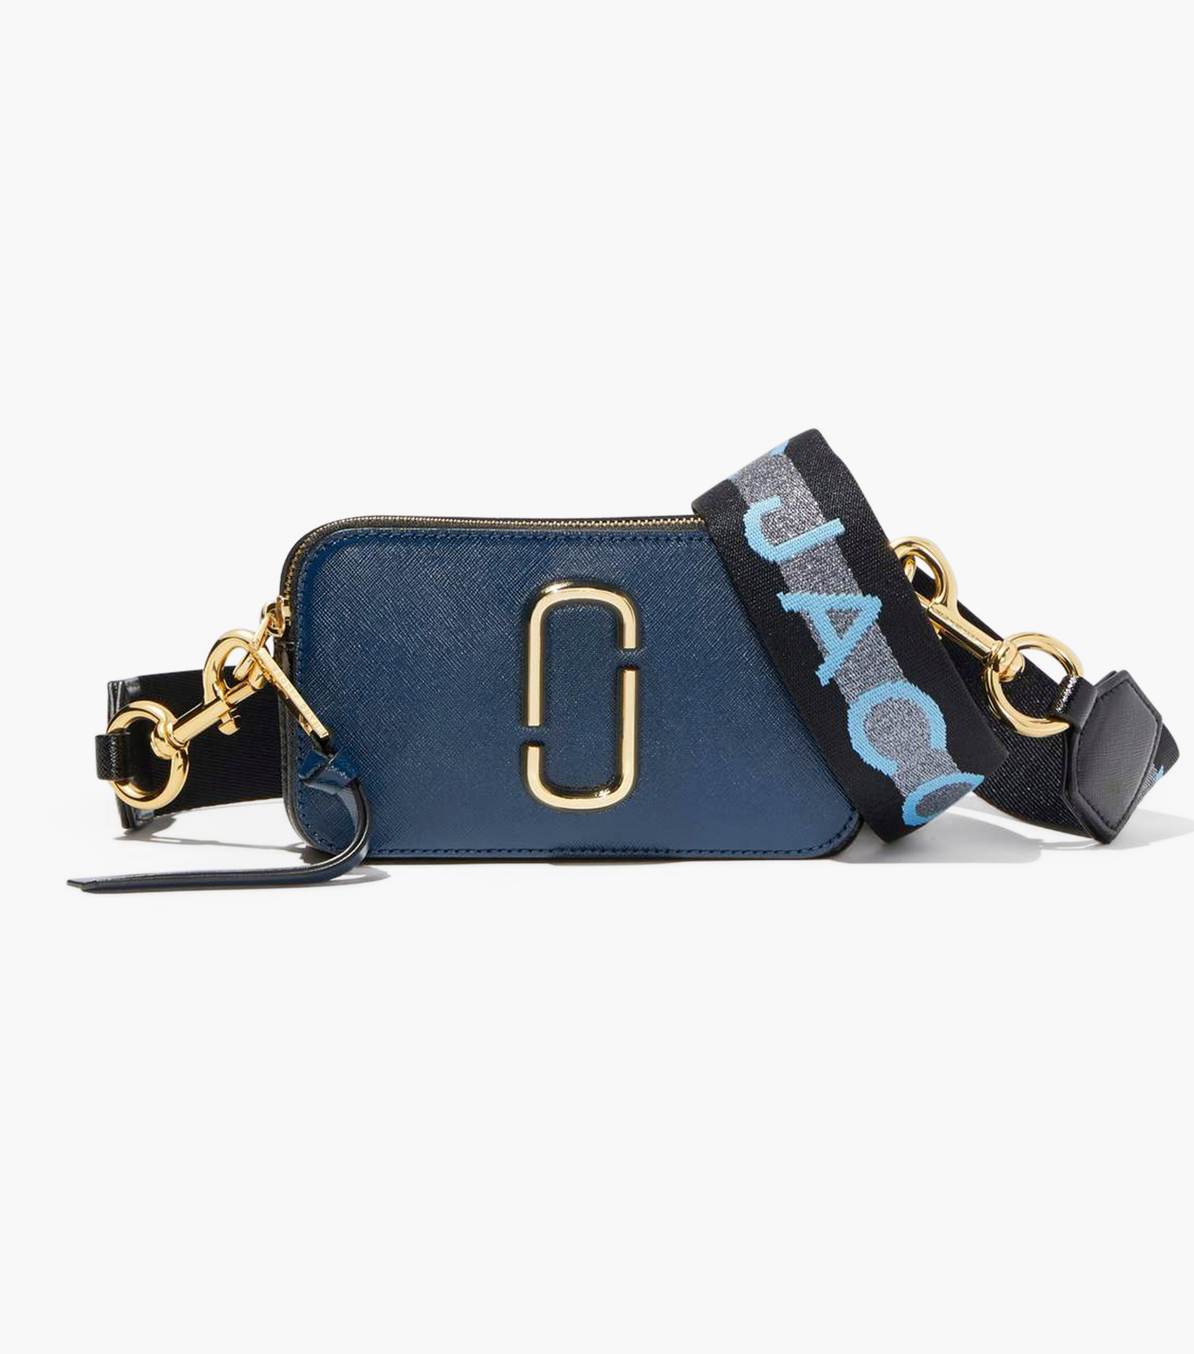 Cross body bags Marc Jacobs - Snapshot blue saffiano leather camera bag -  M0012007494